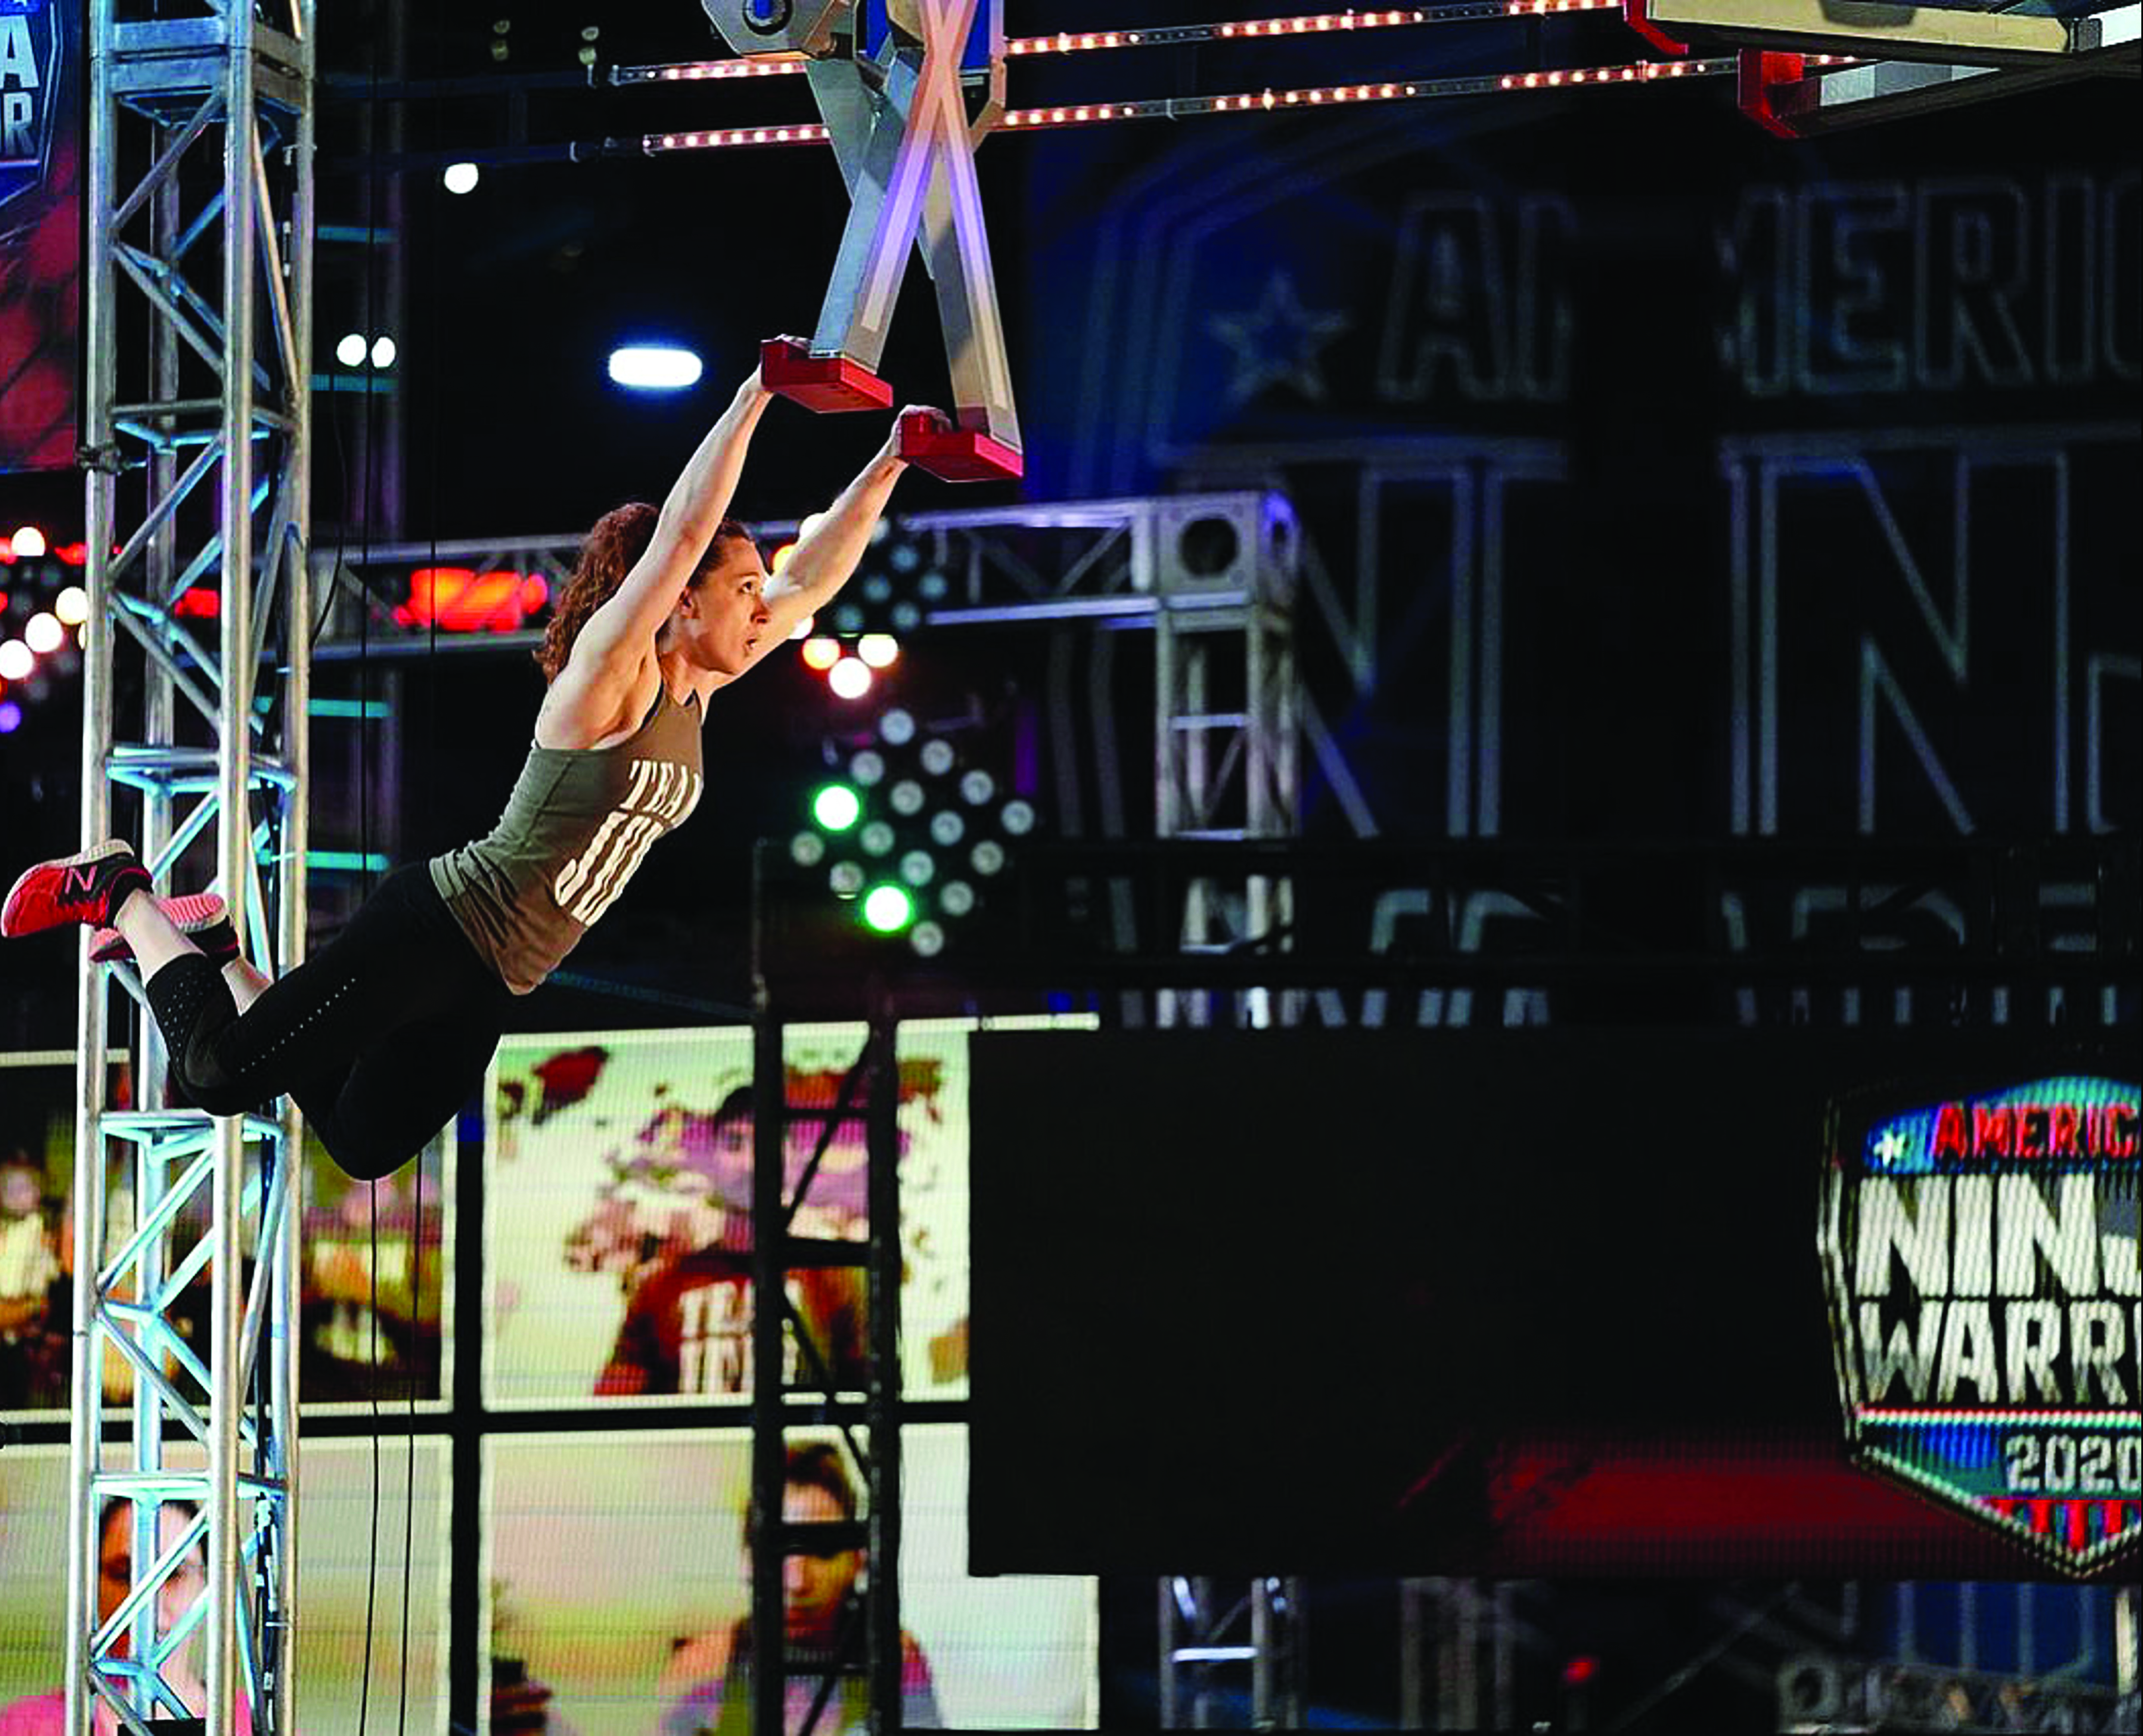 CPT Jeri D’Aurelio, Trial Defense Counsel, TDS West Region (Alaska), competes in the Finals of NBC’s American Ninja Warrior. To qualify for the finals, CPT D’Aurelio placed in the top four of all female competitors nationwide. During the finals, only one woman went further on the obstacle course.